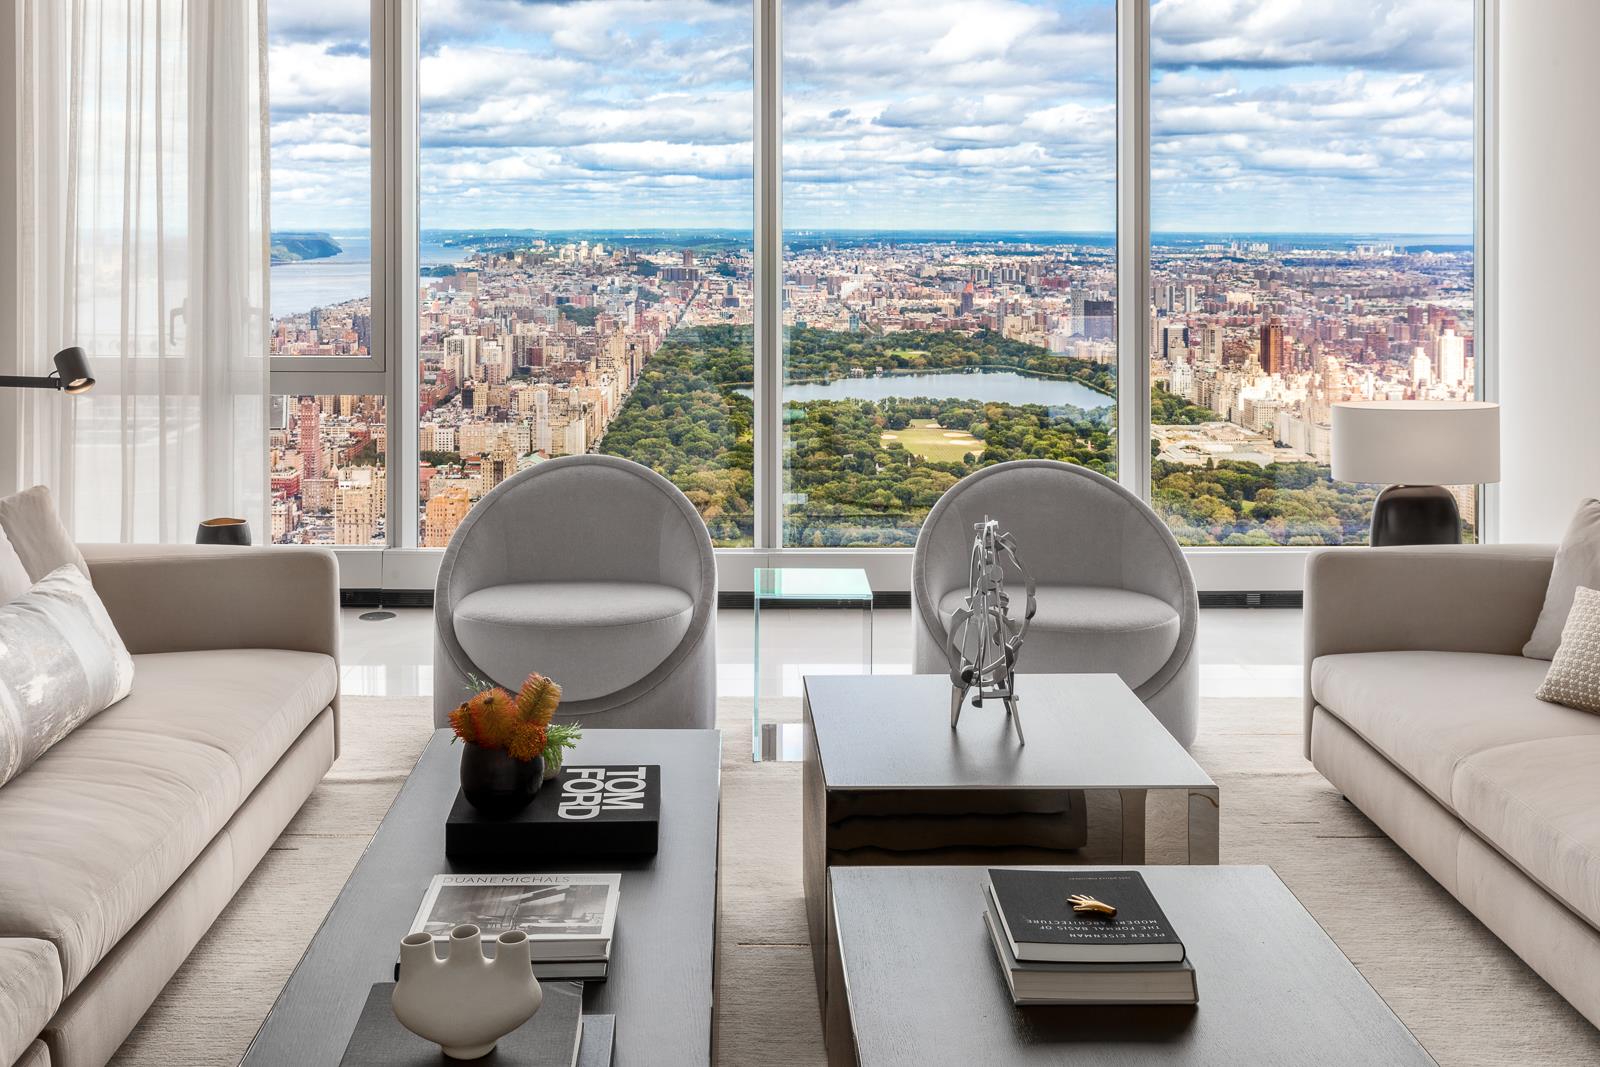 217 West 57th Street 97E, Central Park South, Midtown West, NYC - 4 Bedrooms  4.5 Bathrooms  8 Rooms - 